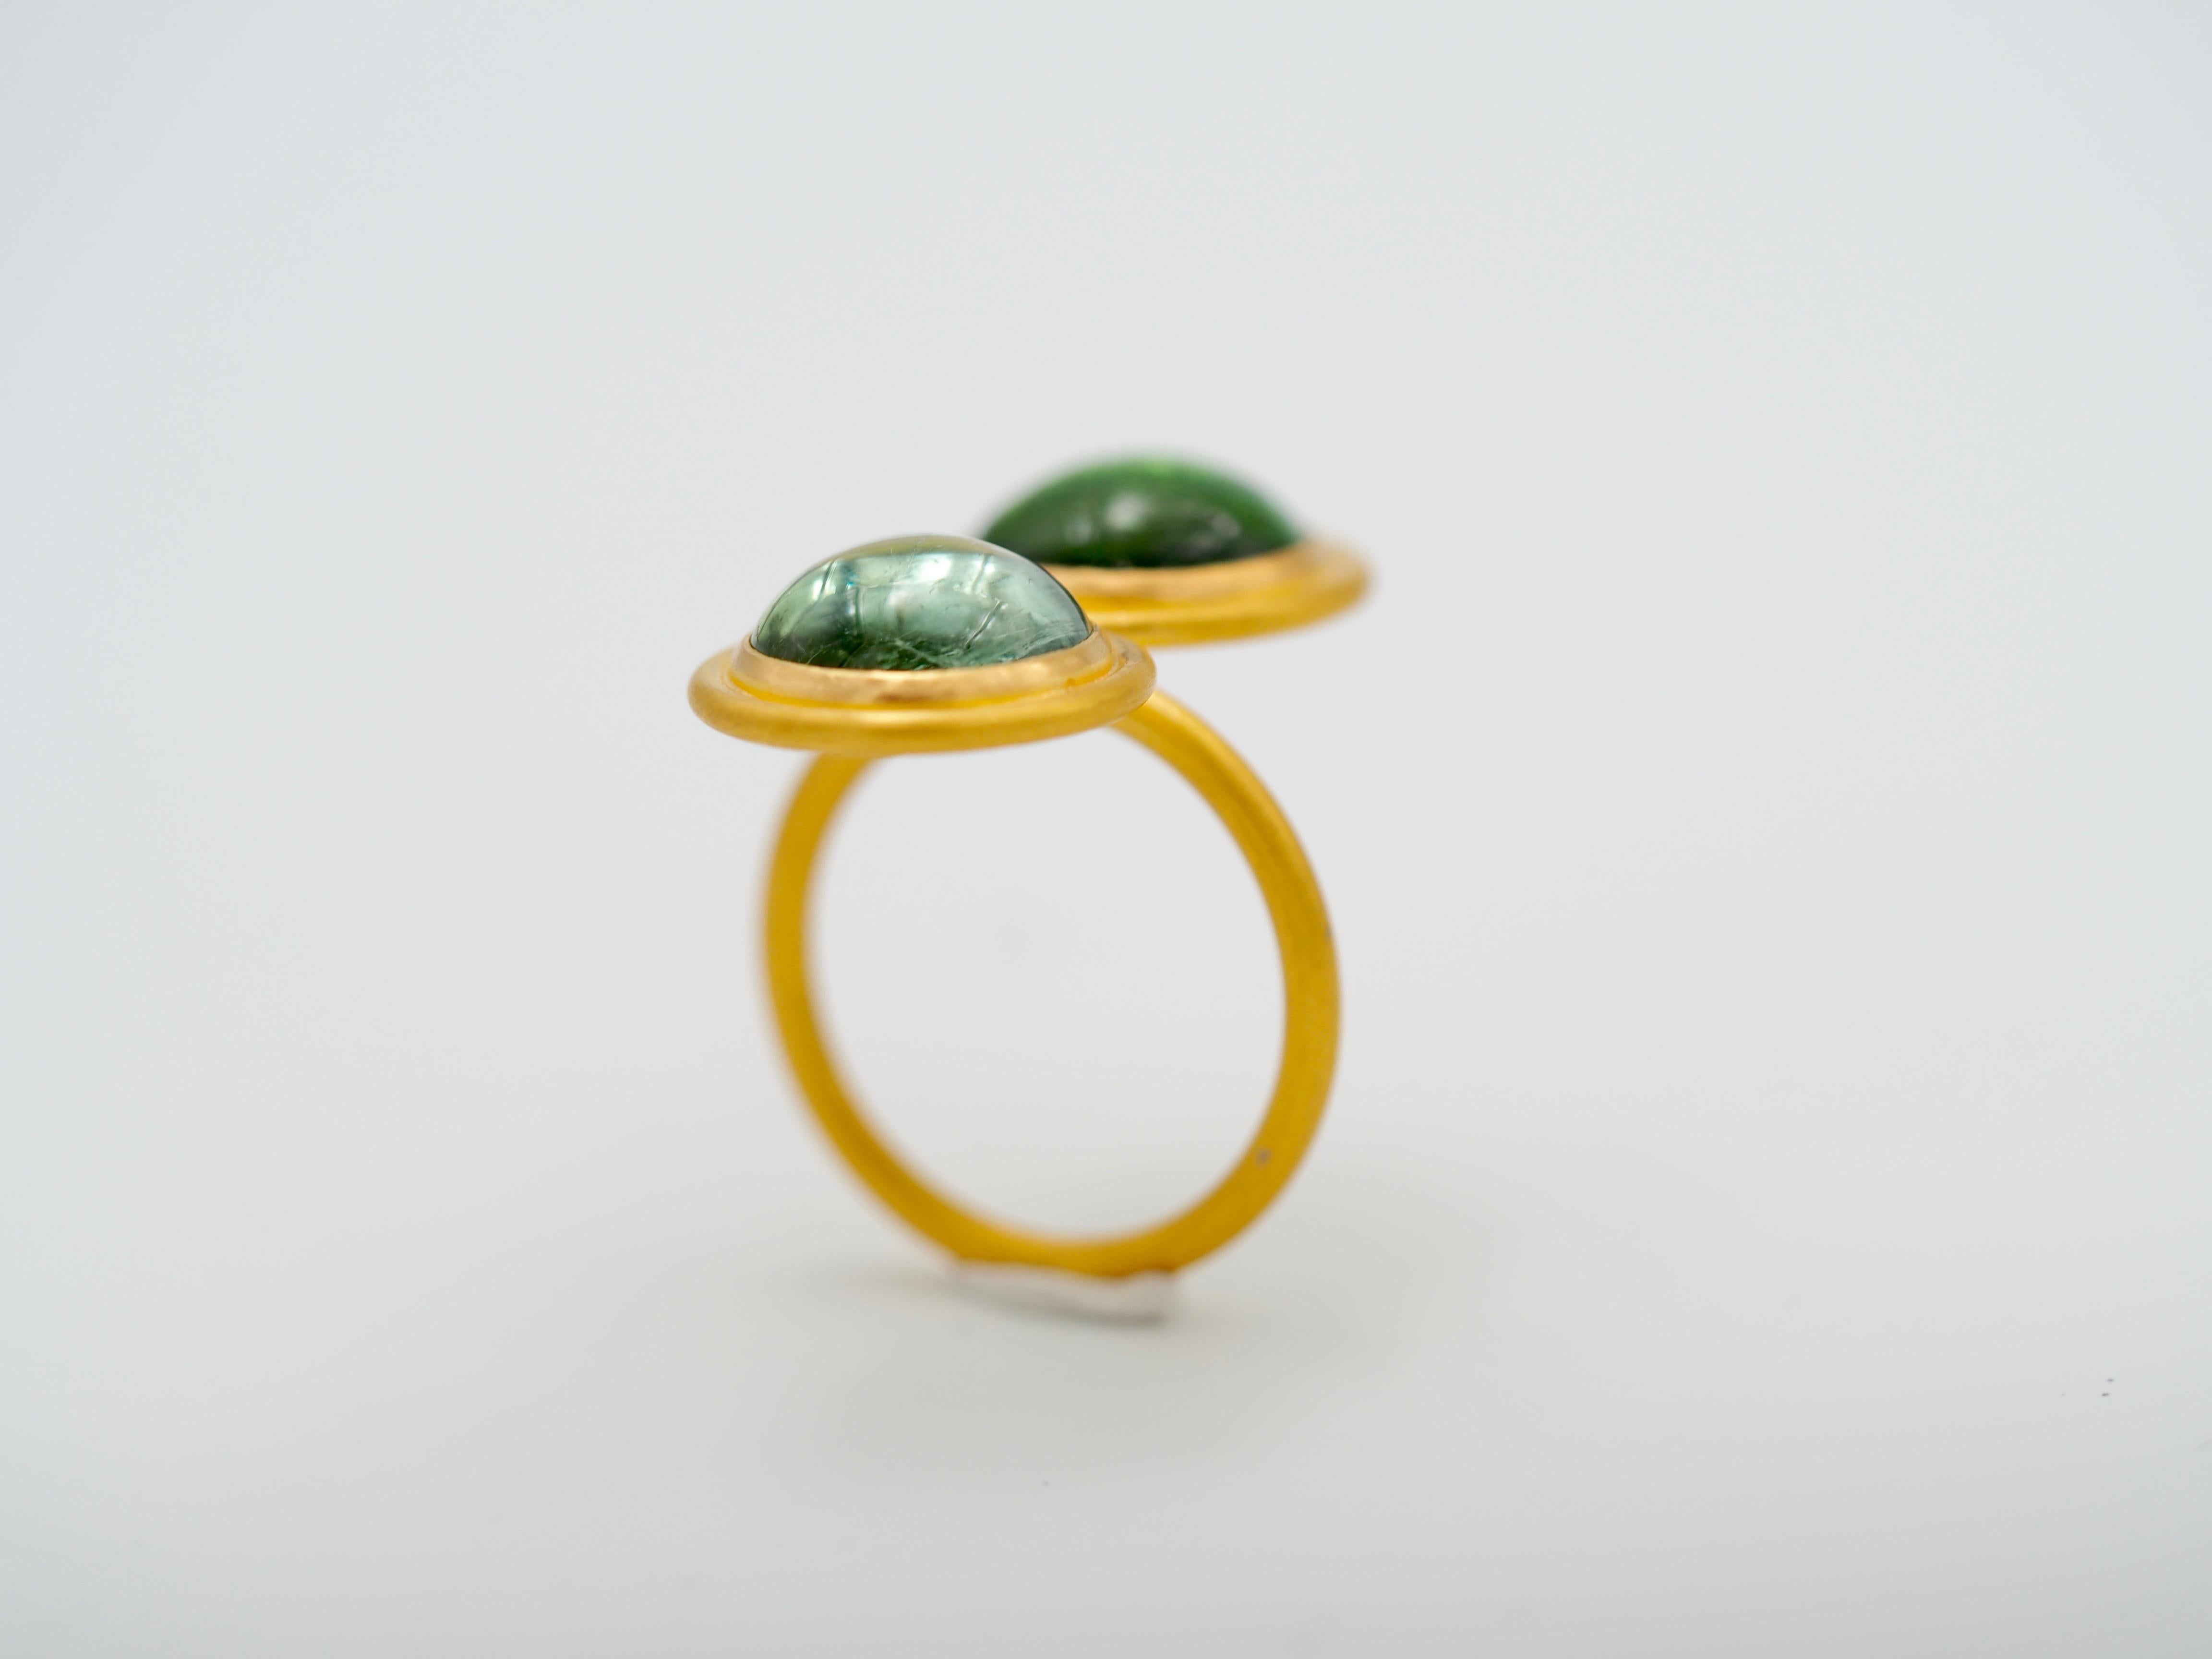 This 8 figure modern ring by Scrives is made with 2 large green tourmalines (12mm rounds, total weight: 10.64cts), one in light green and the other one in darker green. 
The stones exhibit visible natural and typical inclusions. The stones are